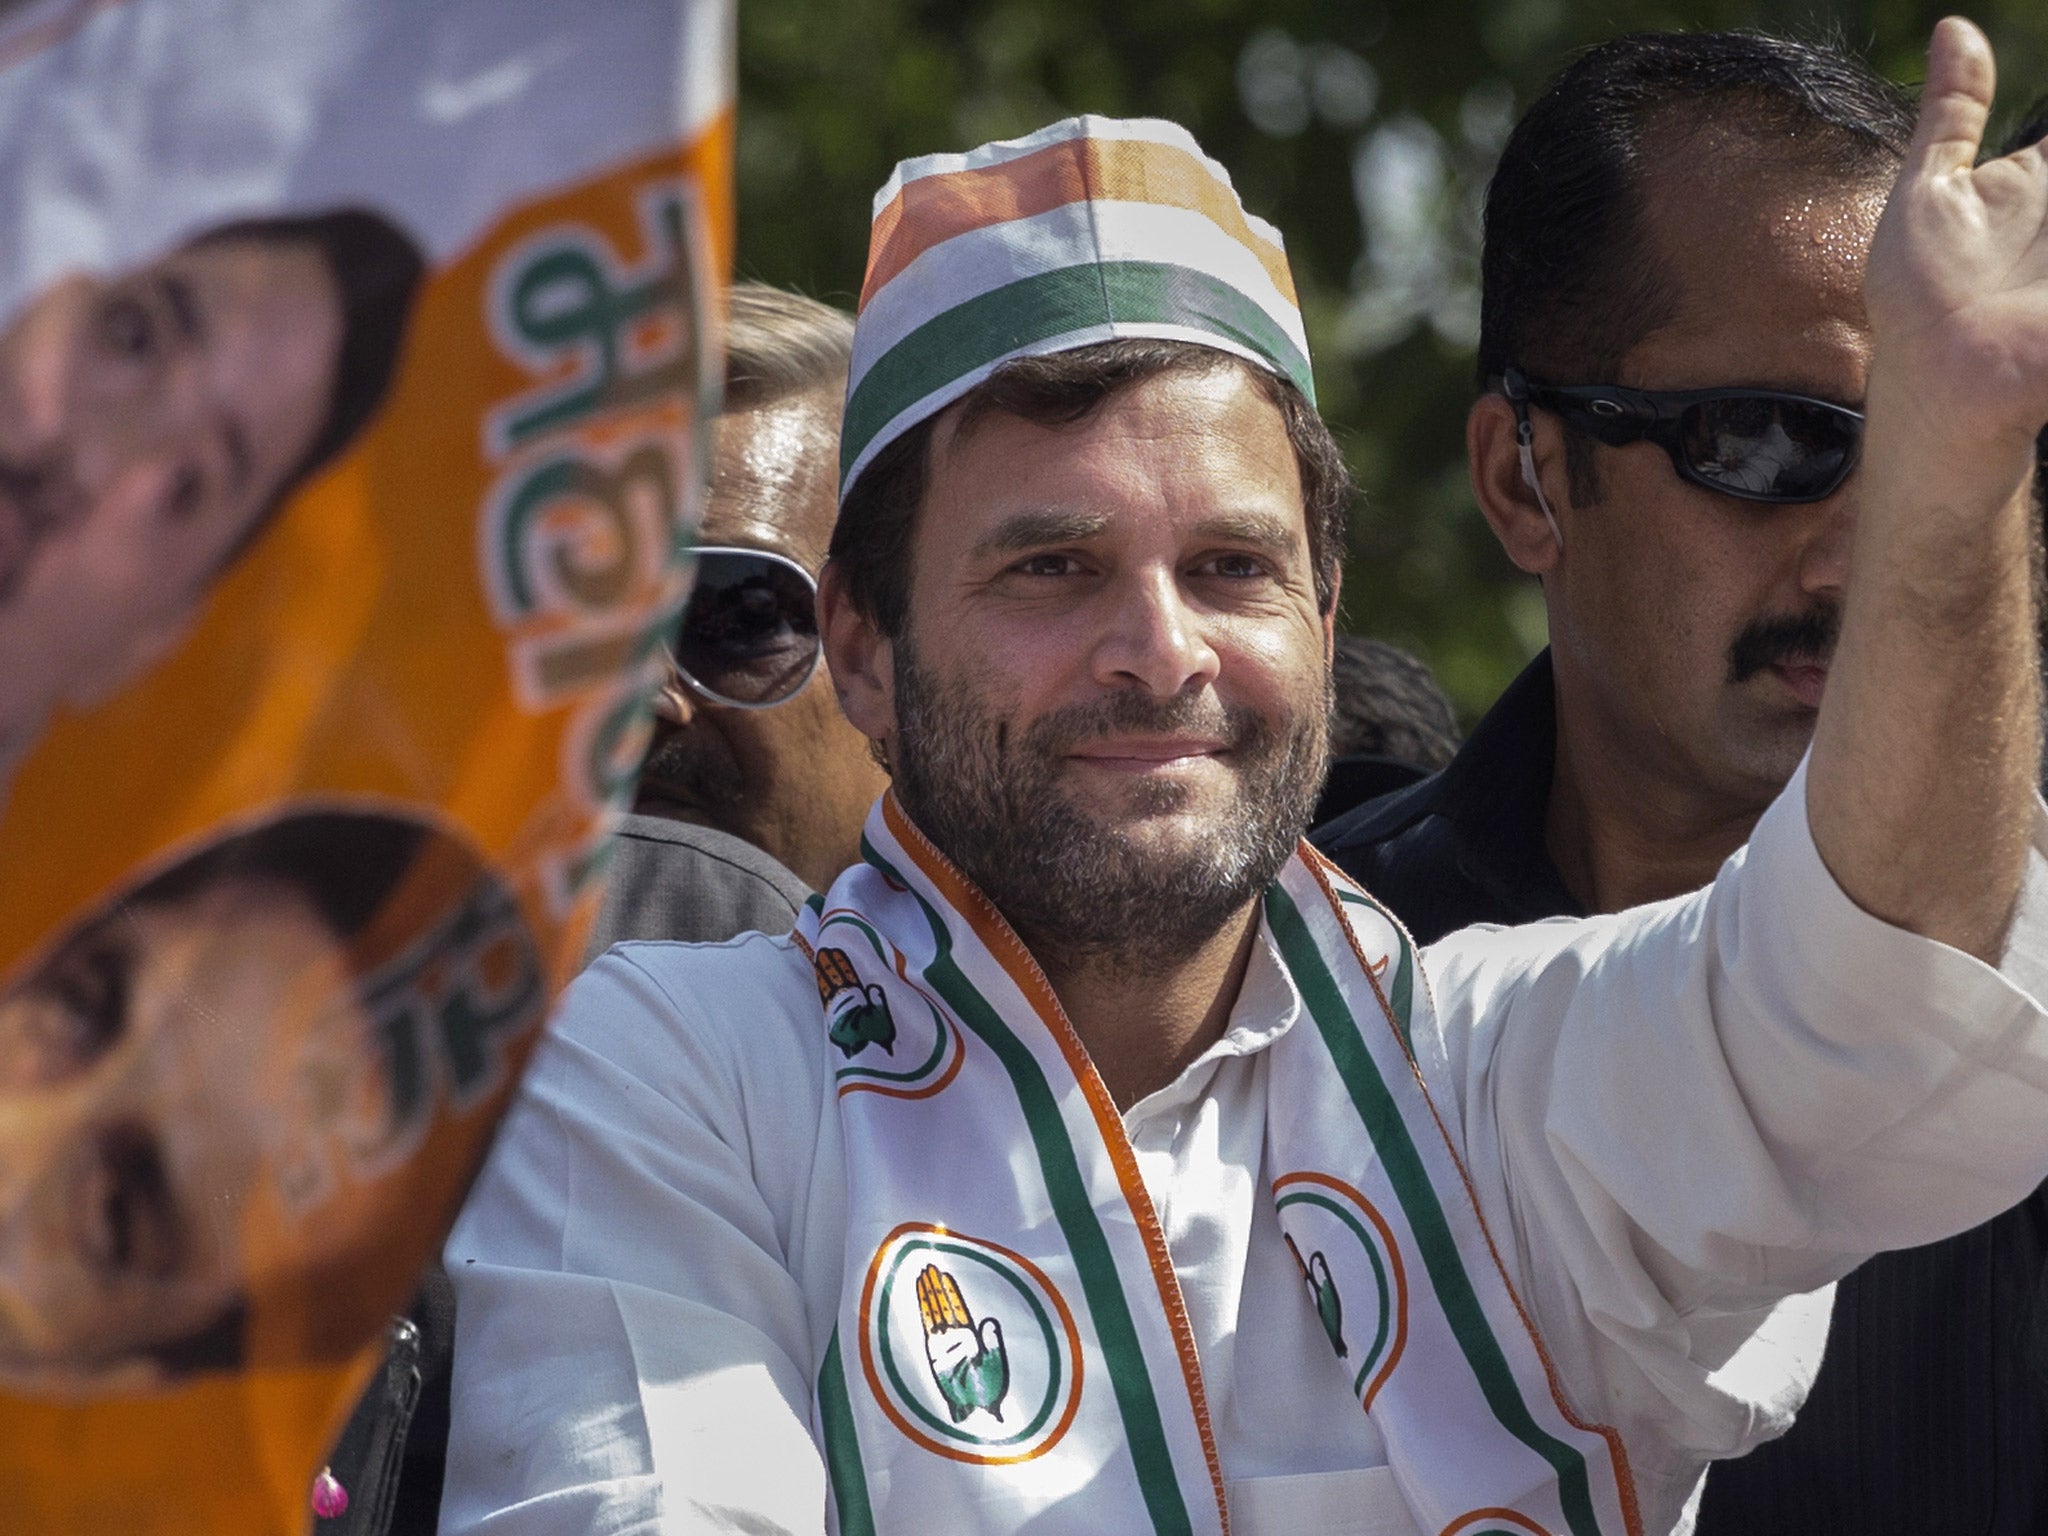 Congress Party’s Rahul Gandhi waves to supporters at a recent rally in Varanasi